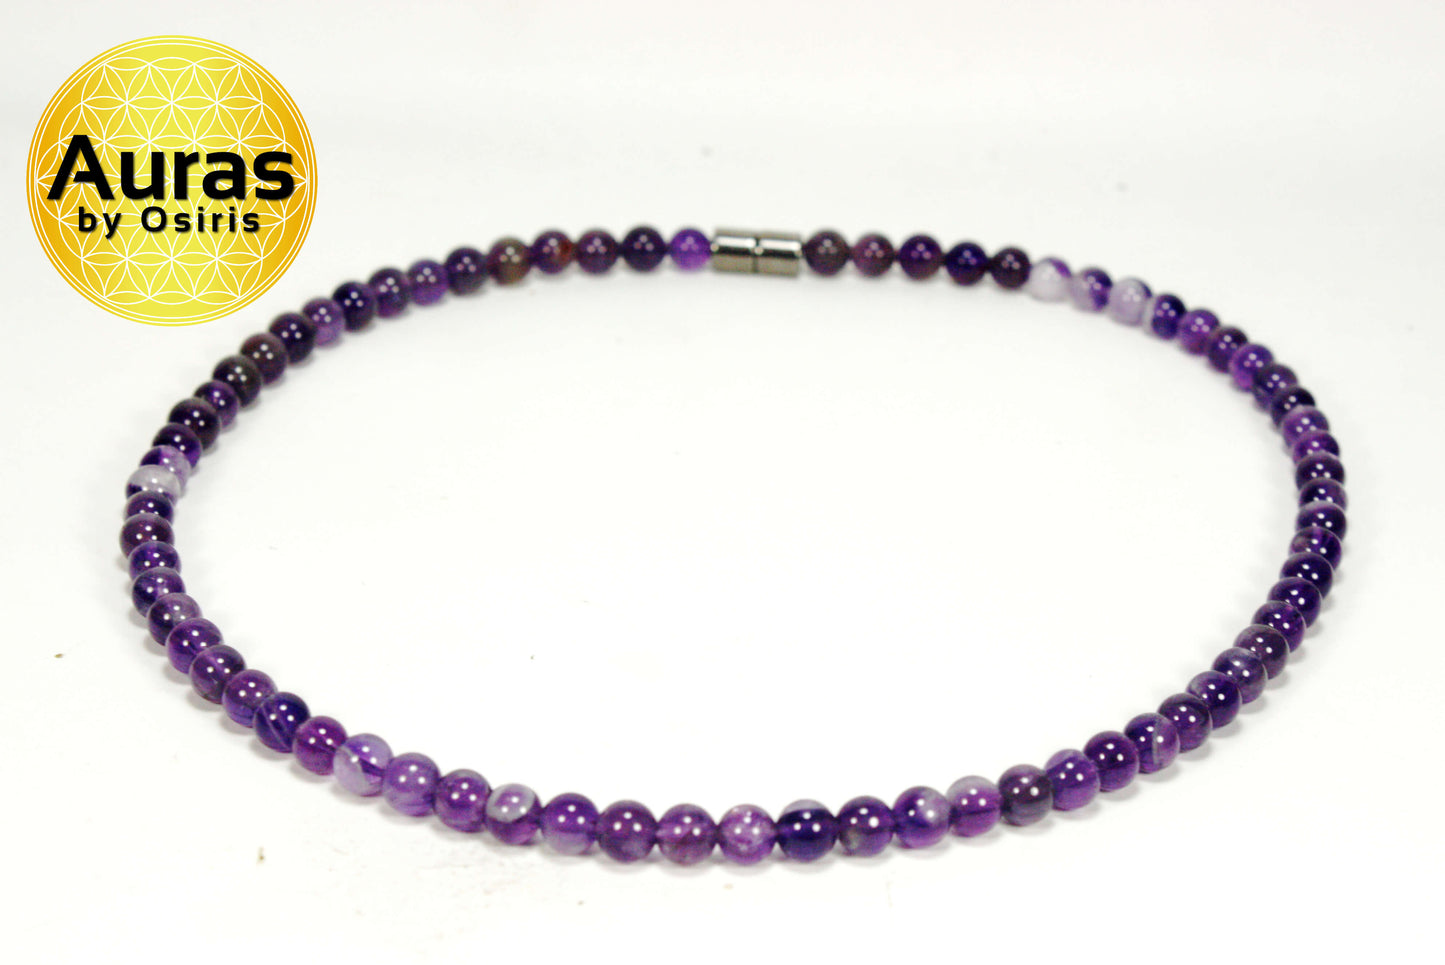 Amethyst Necklace (6mm Small Beads)